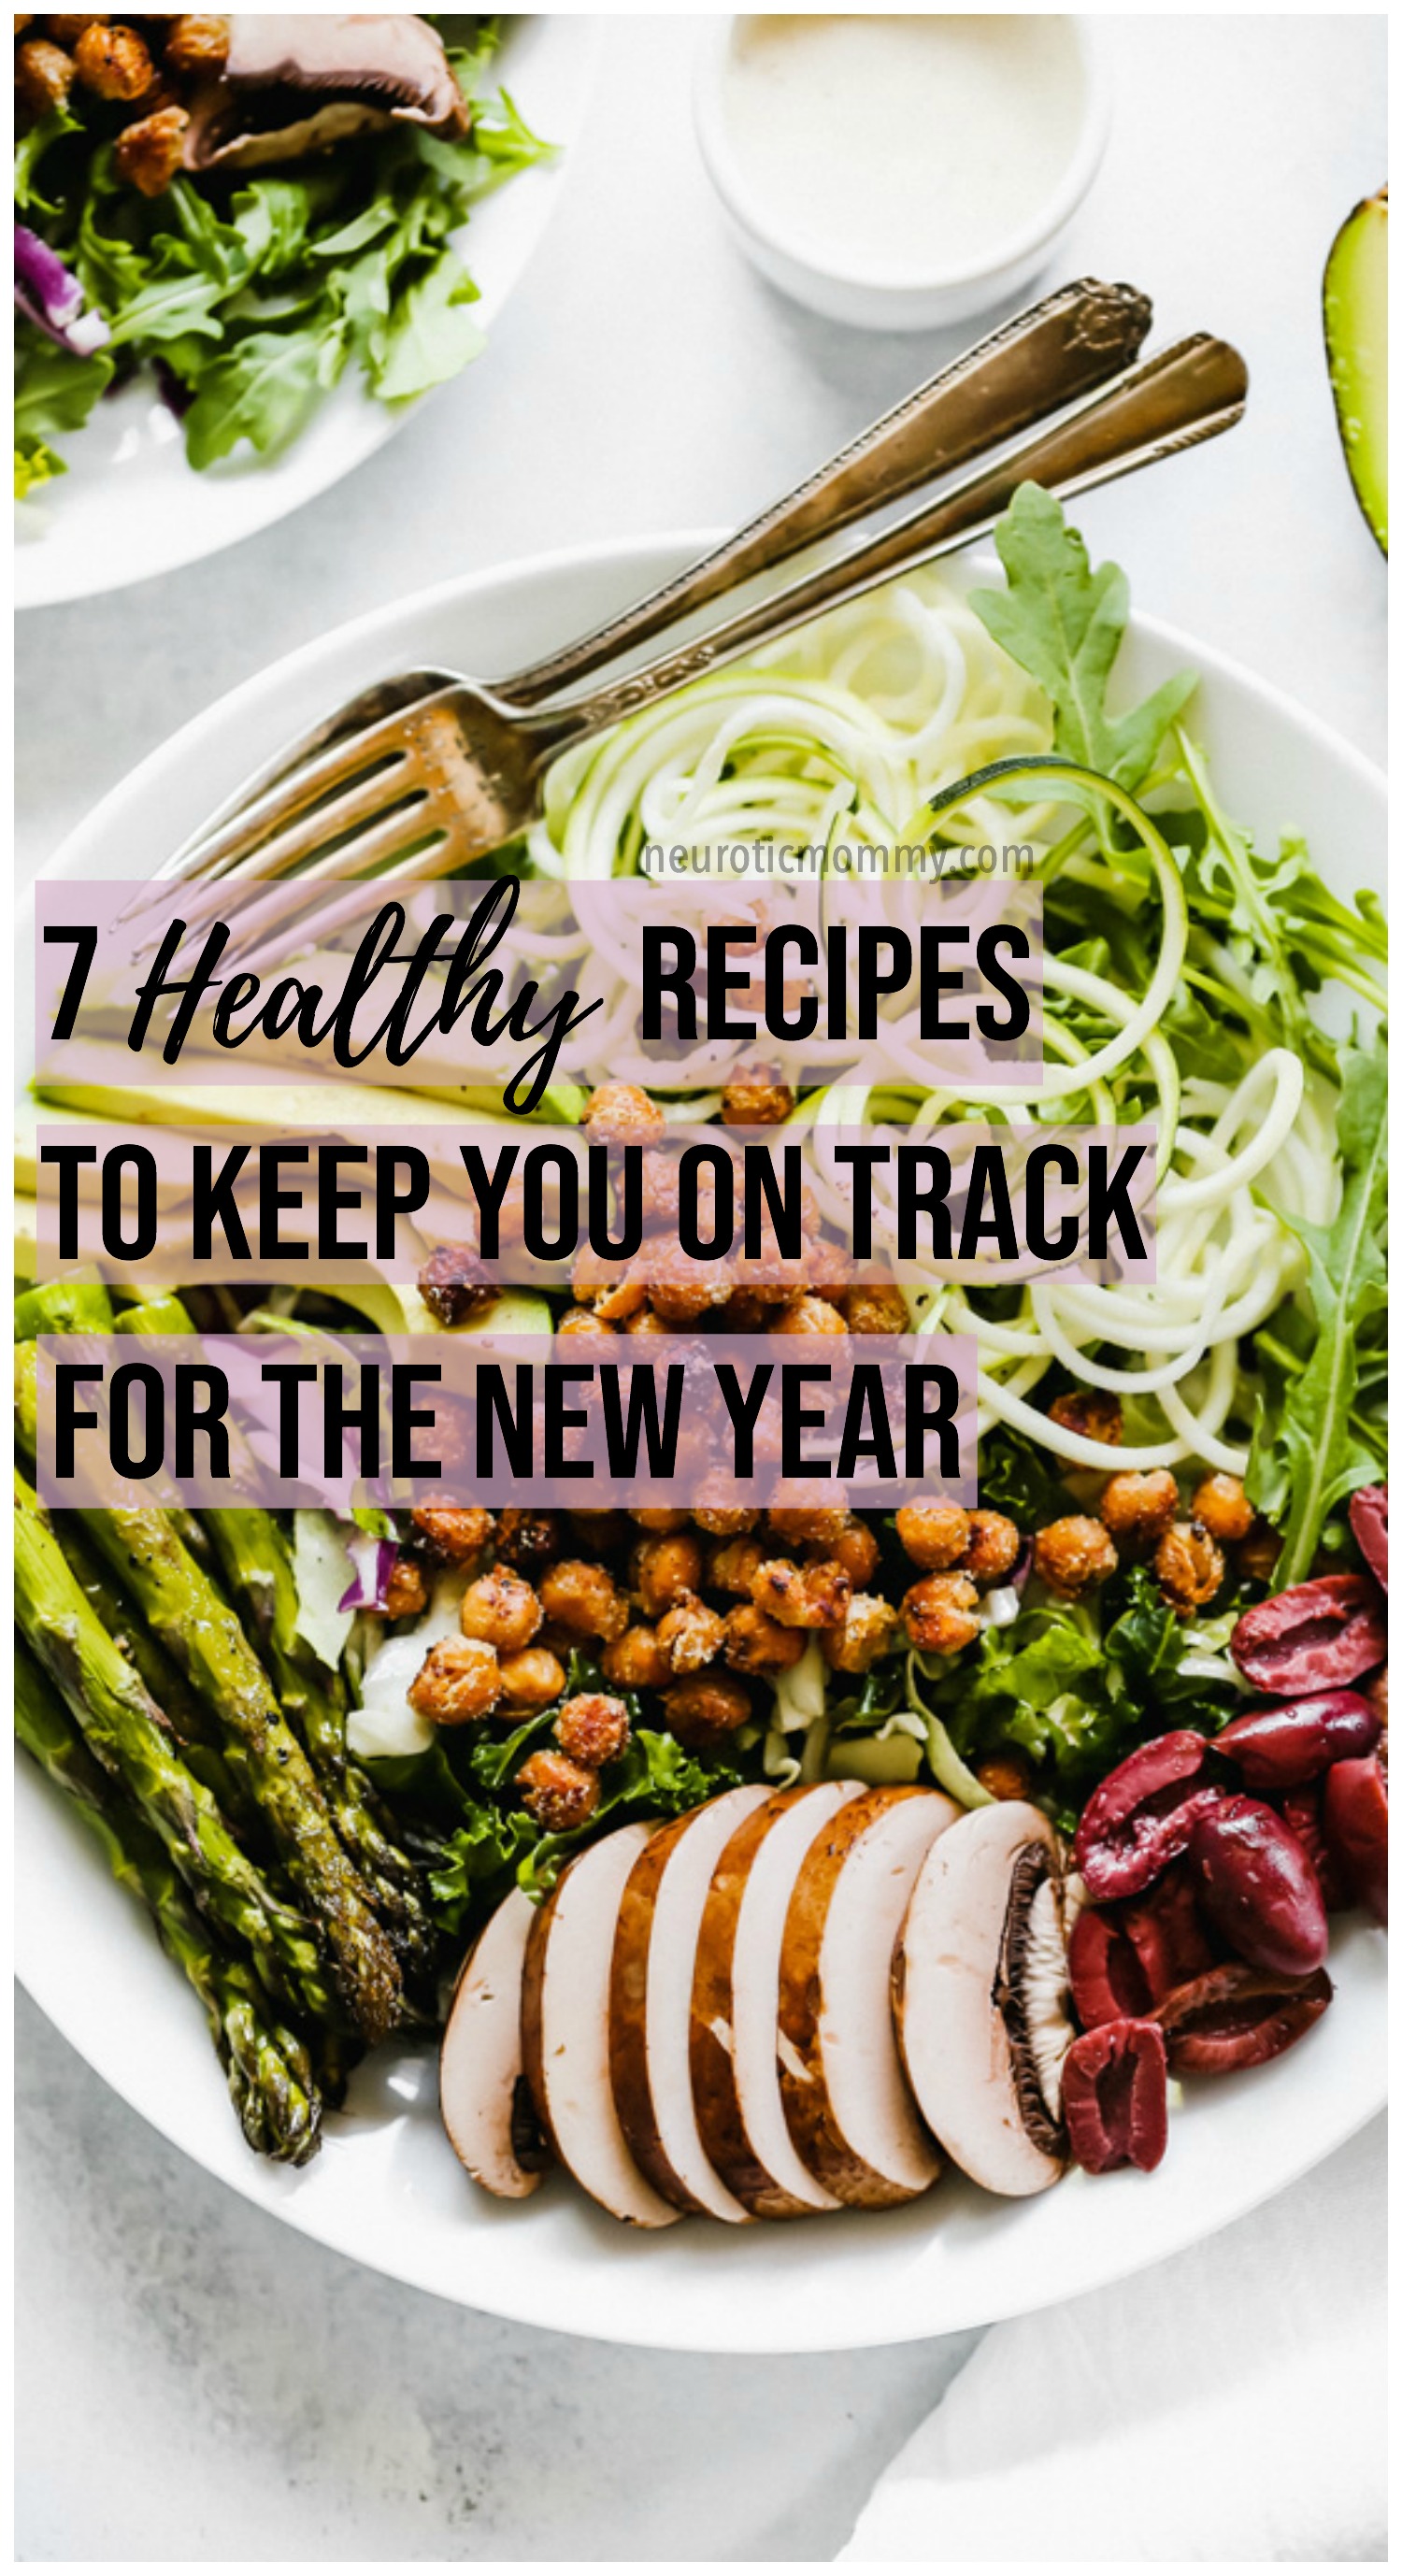 7 Healthy Recipes to Keep You on Track for the New Year - These recipes will keep you feeling good and fueled up for 2019 all while keeping to your goals. NeuroticMommy.com #vegan #mealprep